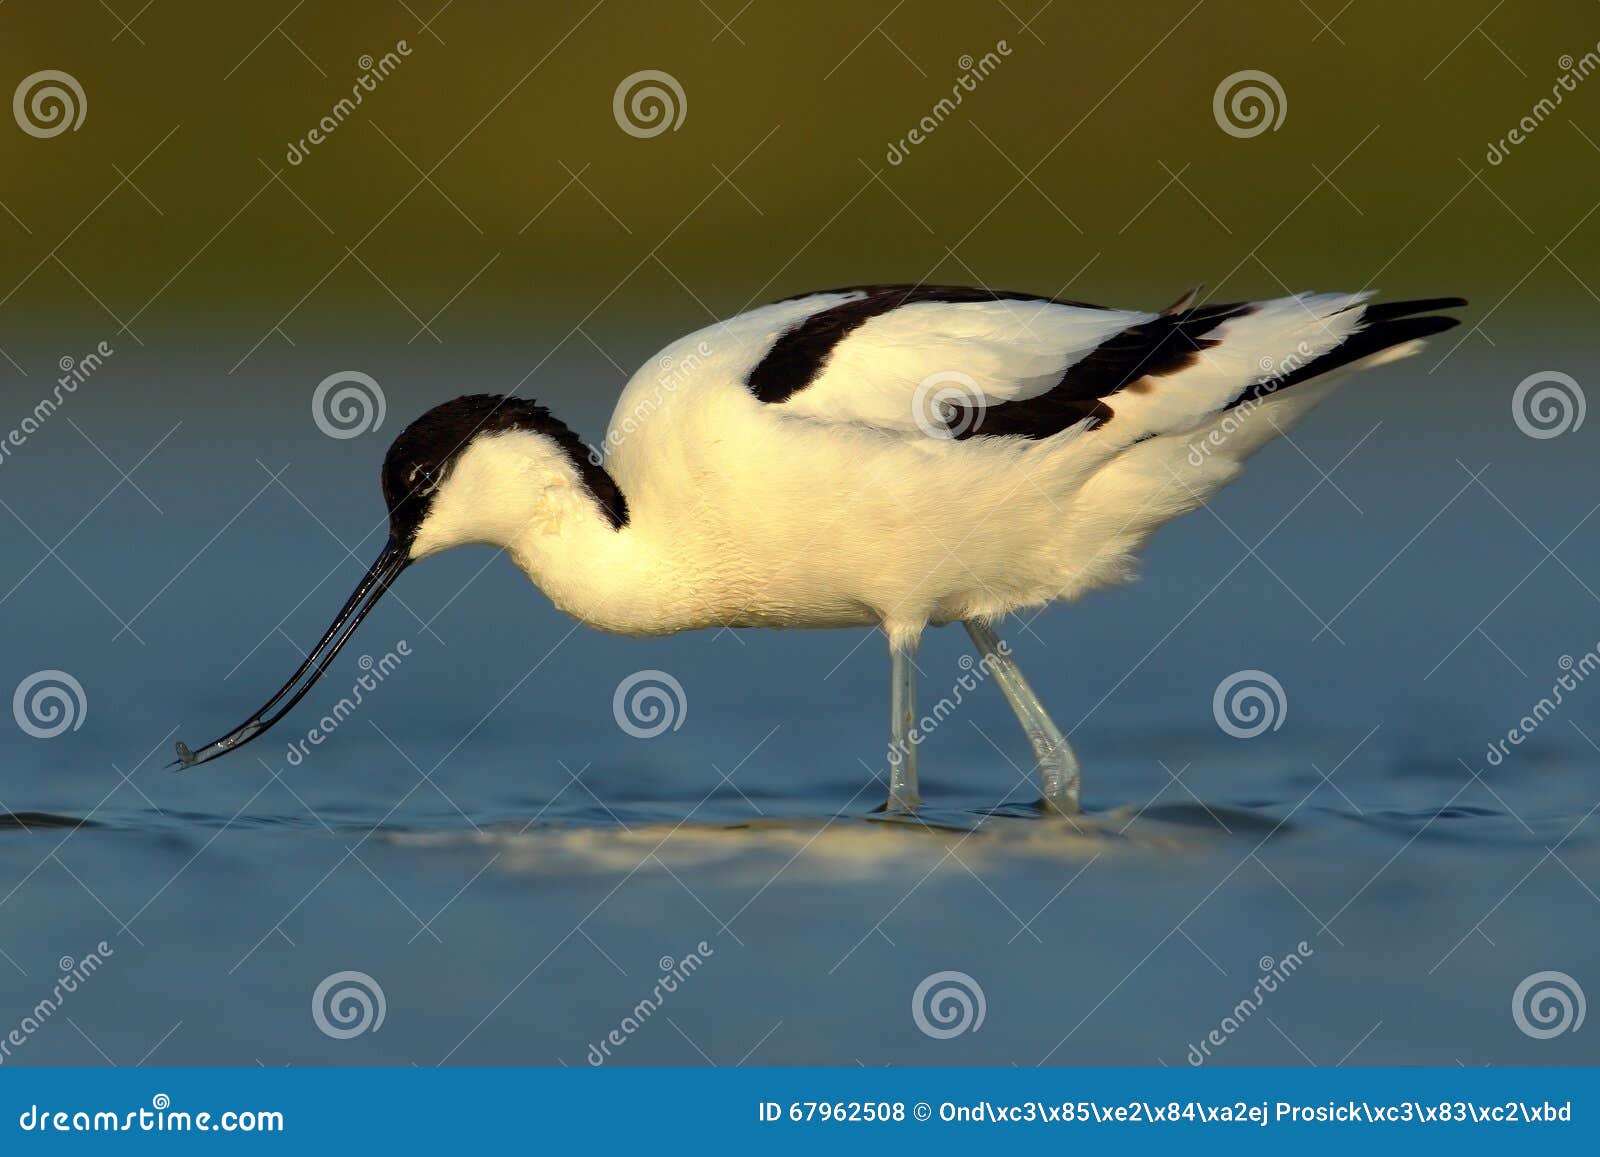 pied avocet, recurvirostra avosetta, black and white wader bird in blue water, submerged head, france